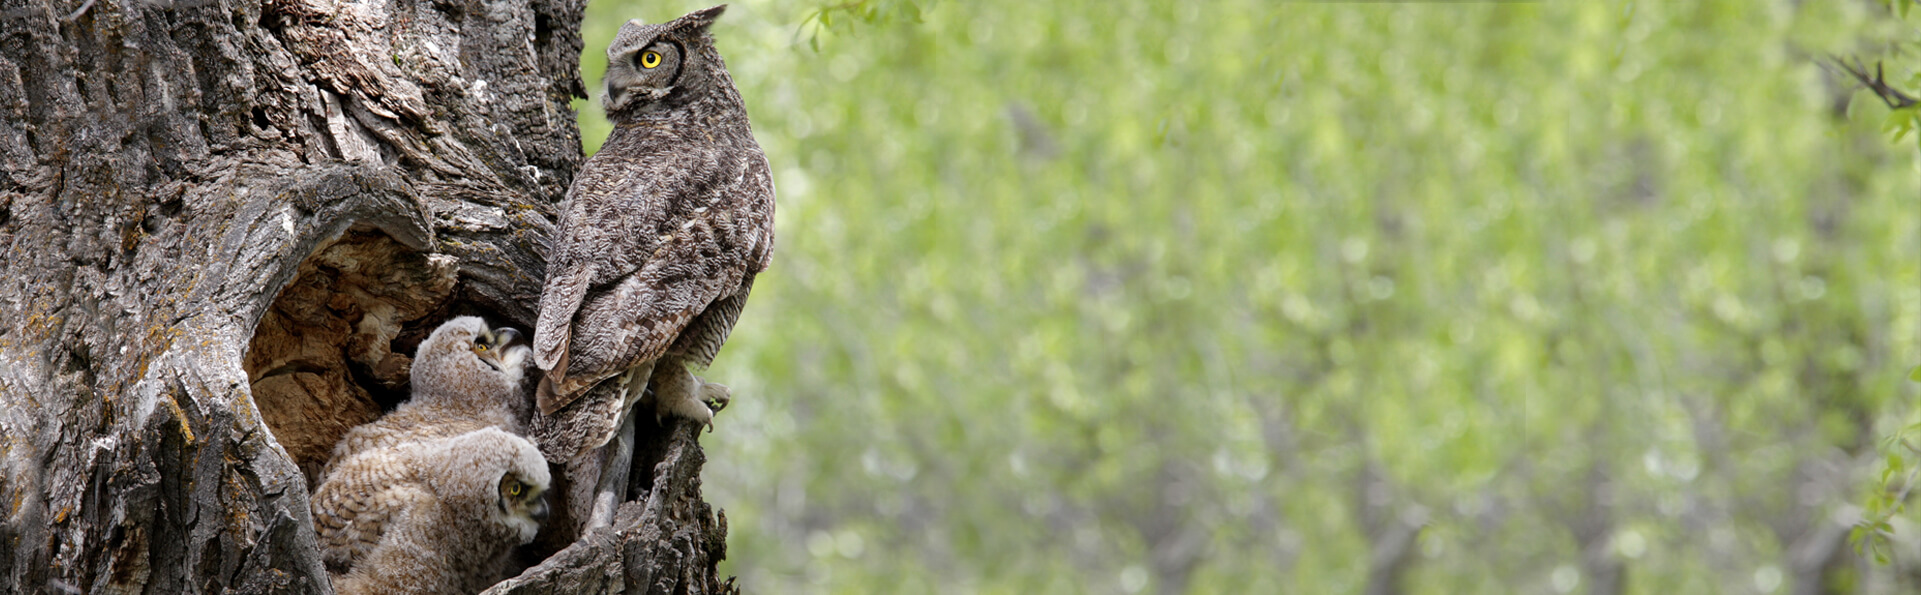 Great-horned Owls, Ronnie Howard/Shutterstock